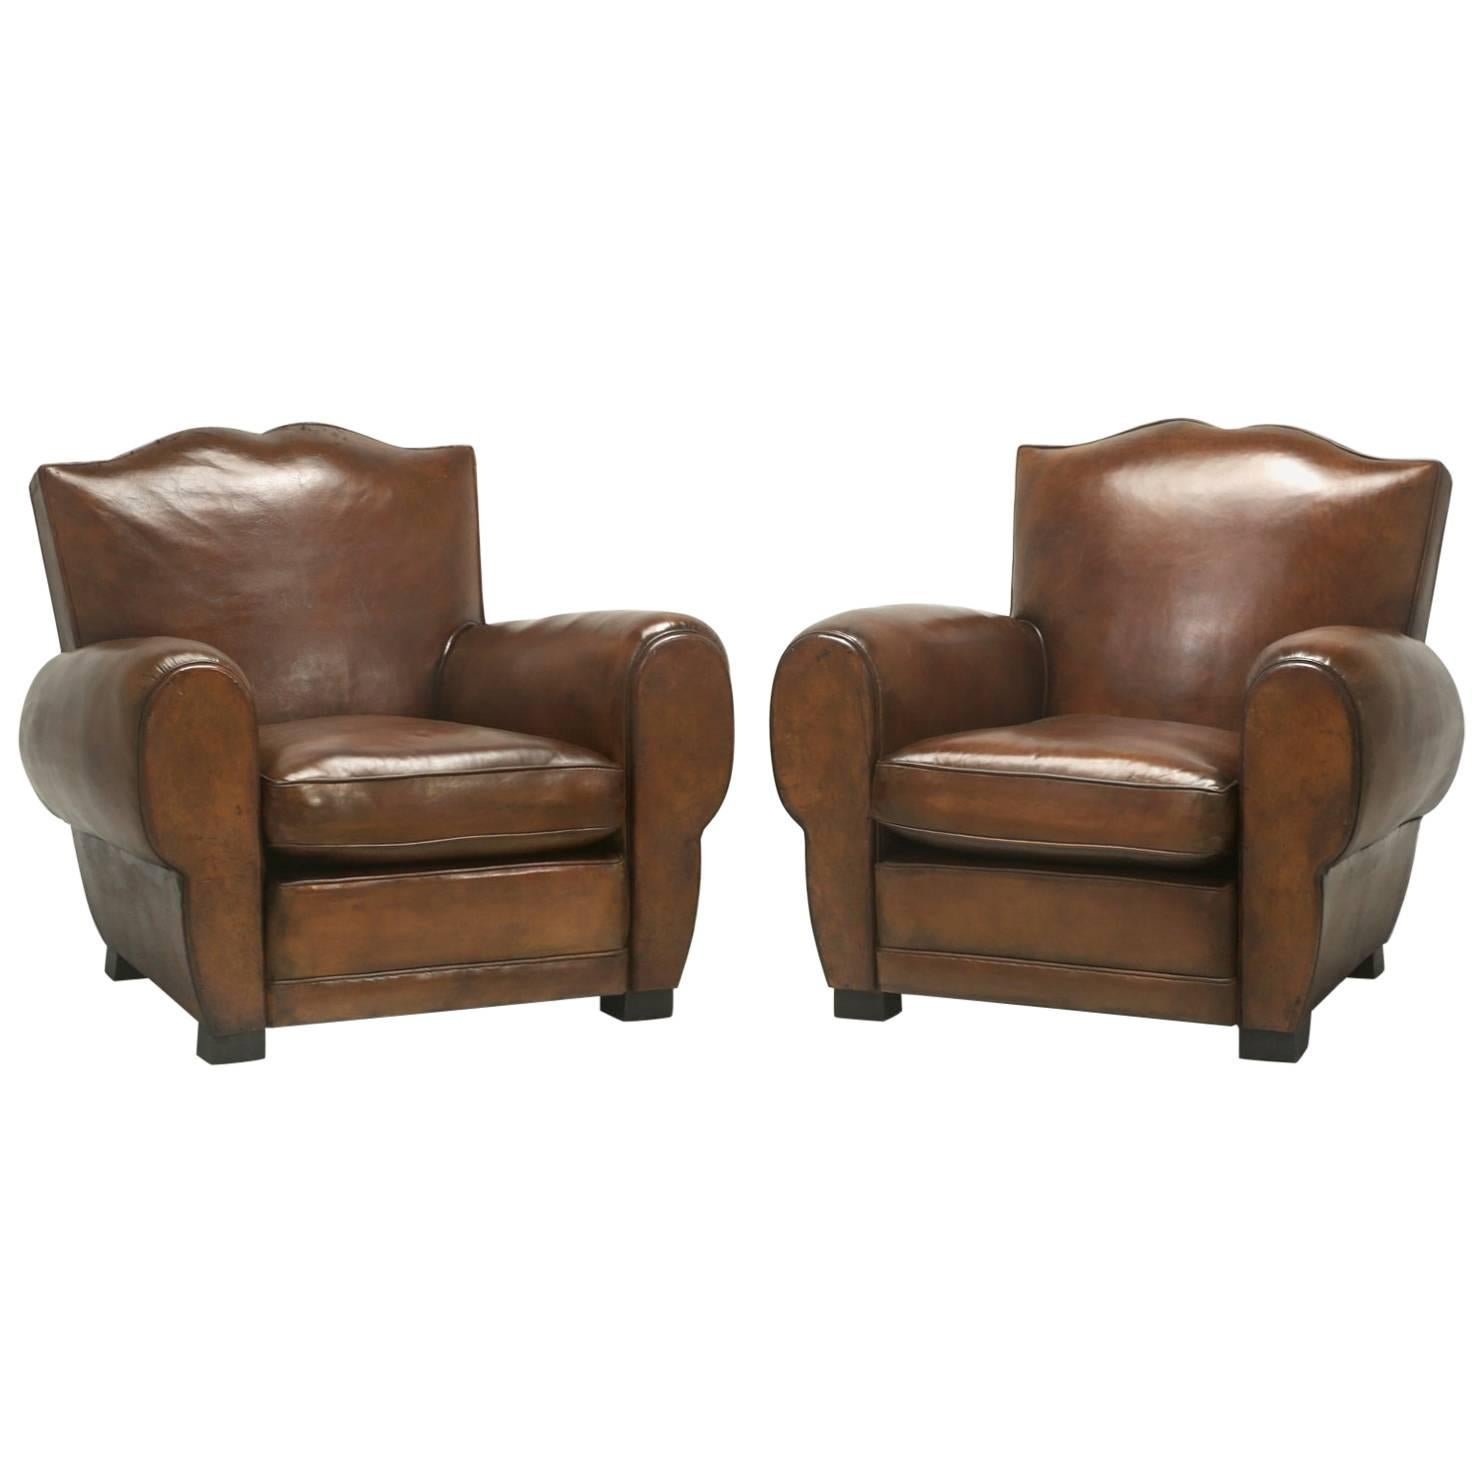 Pair of French "Moustache" Style Leather Club Chairs, Correctly Restored